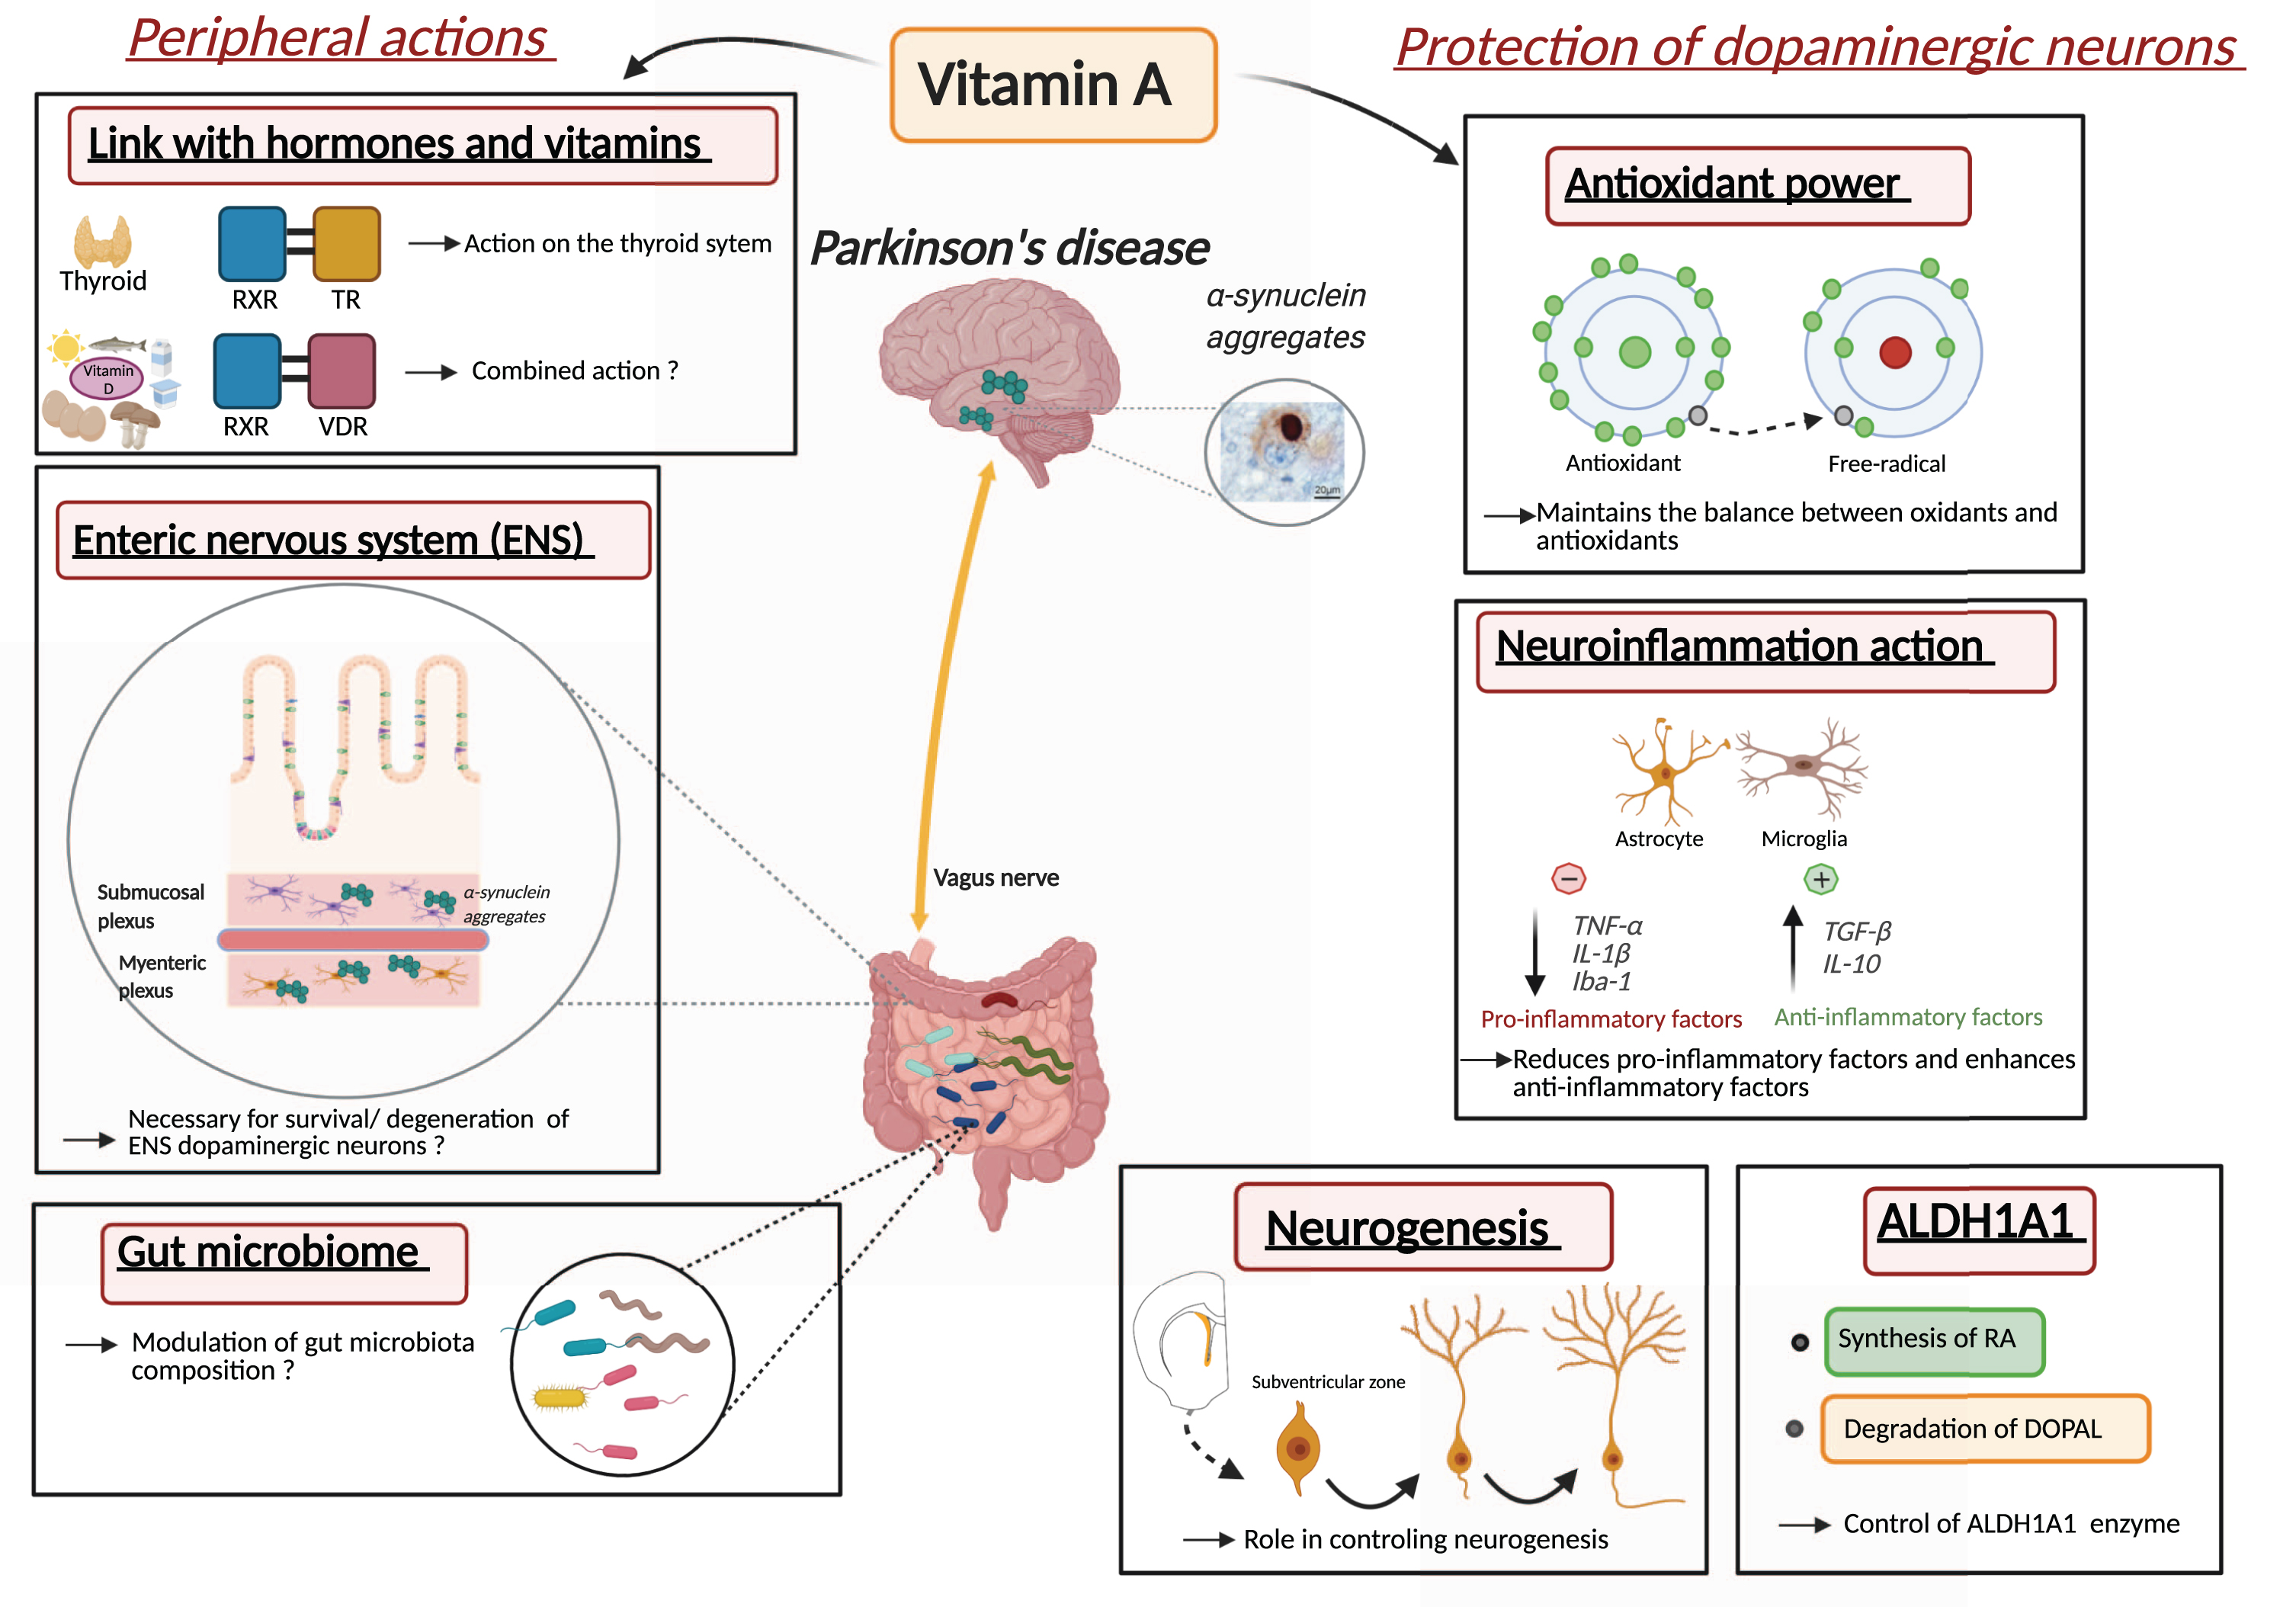 Proposed roles and mechanisms of vitamin A metabolism in the pathophysiology of Parkinson’s disease. Inset with α-synuclein aggregates from [110].